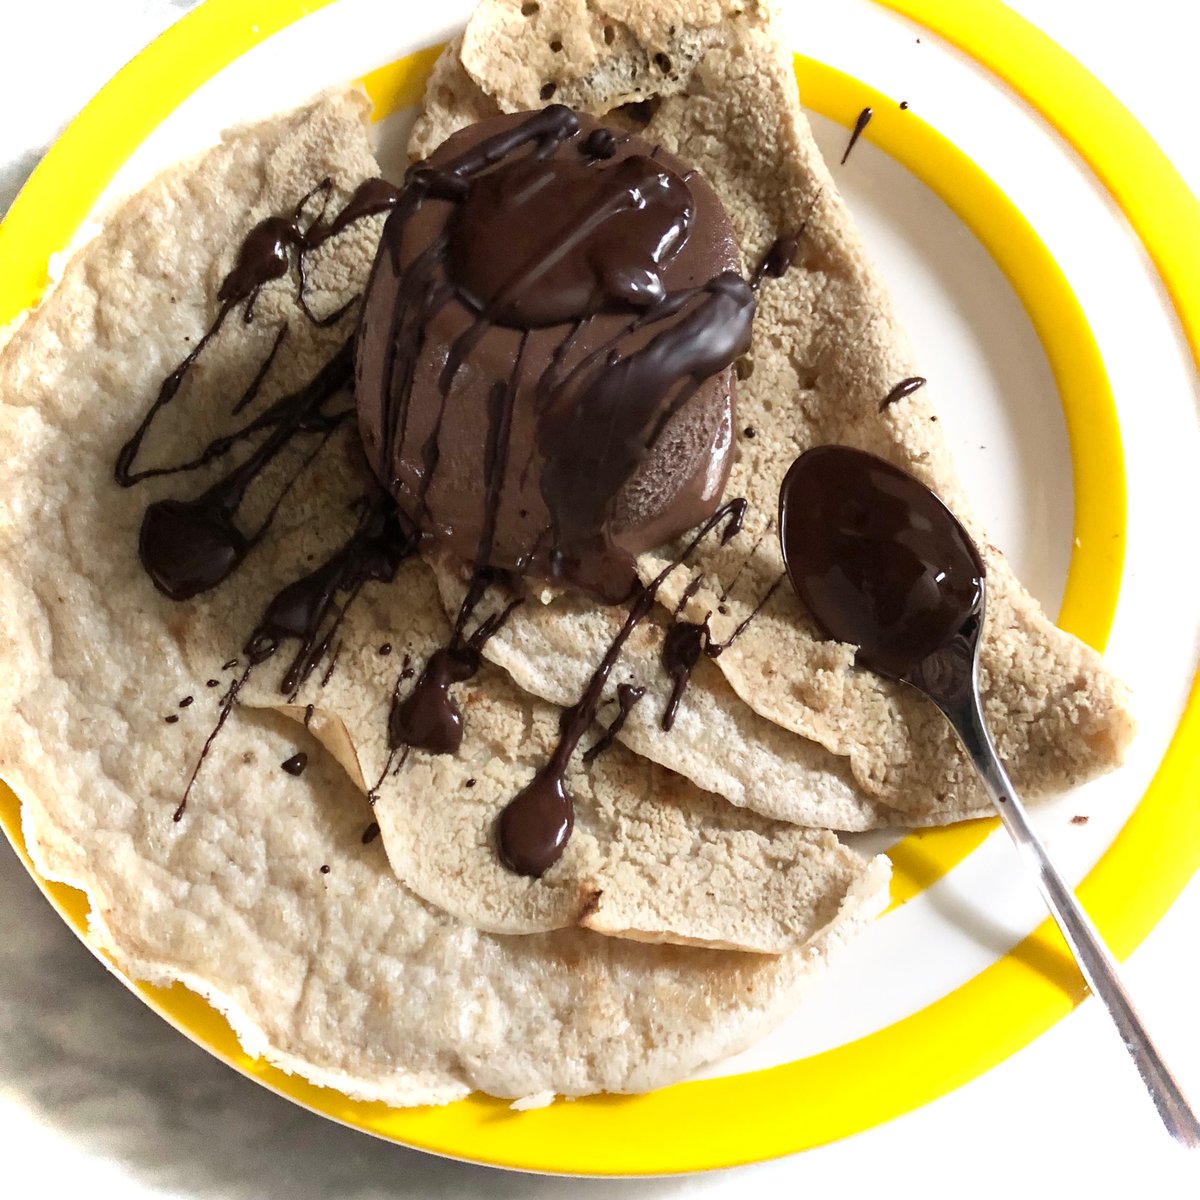 #veganhour @veganhour and, another #plantbased #chocolate #icecream with fat free just #oat and #water #pancakes with, extra melted #chocolate drizzled over the top!